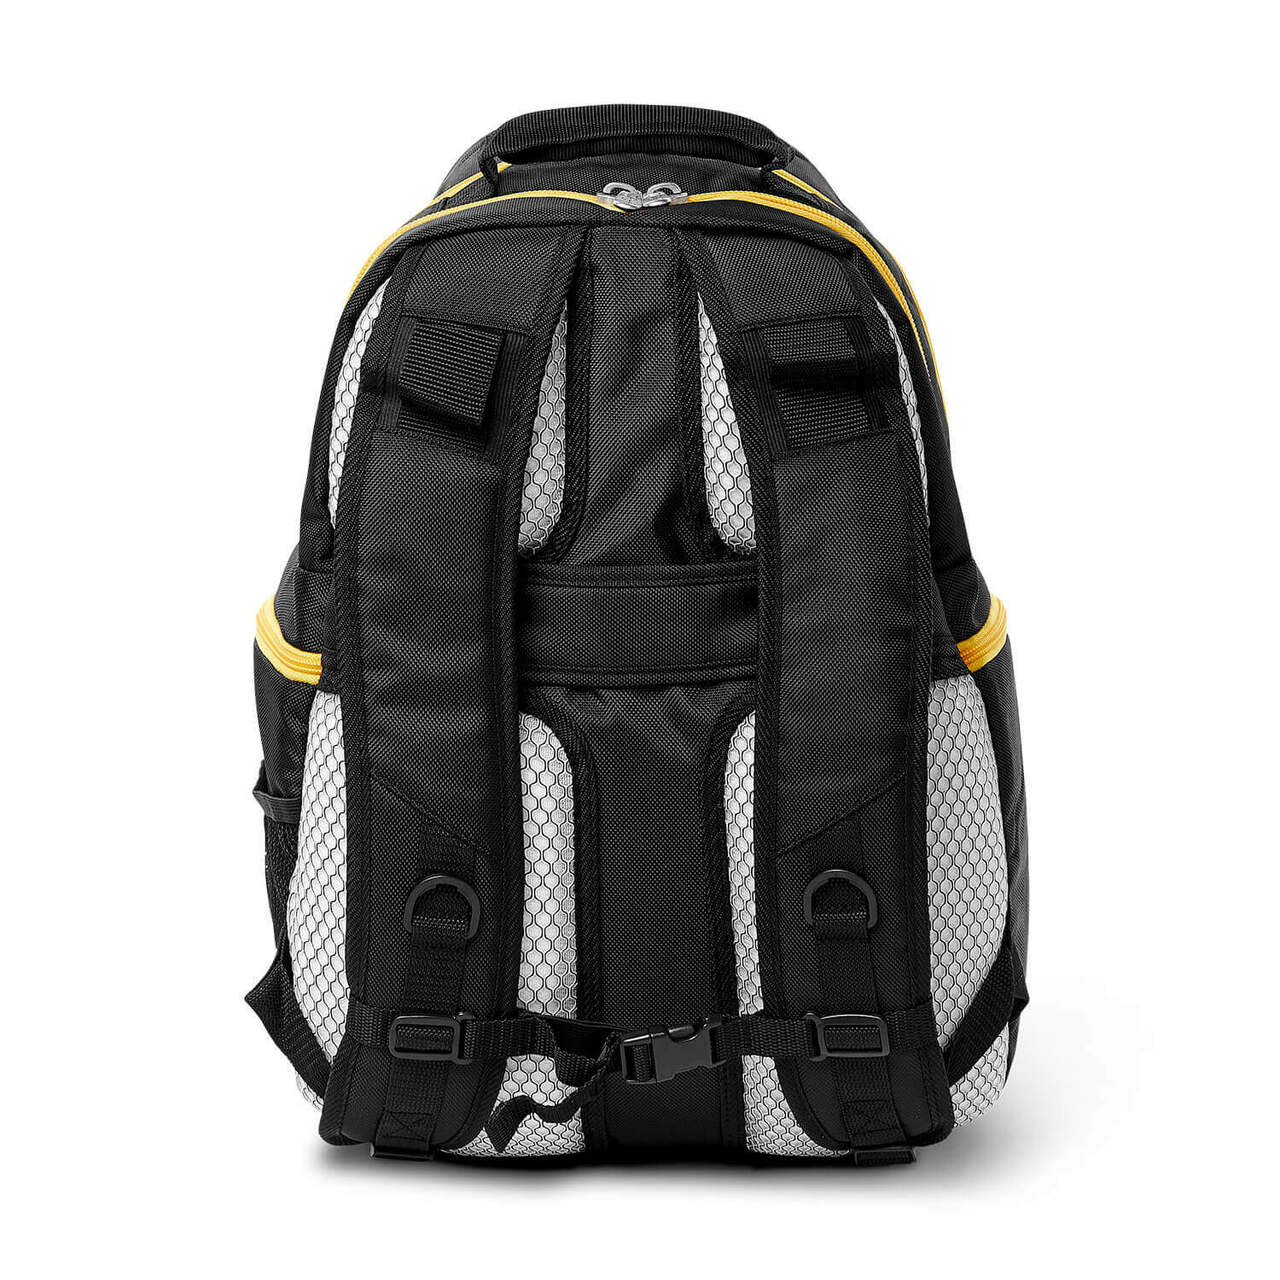 Oakland Athletics 2 Piece Premium Colored Trim Backpack and Luggage Set